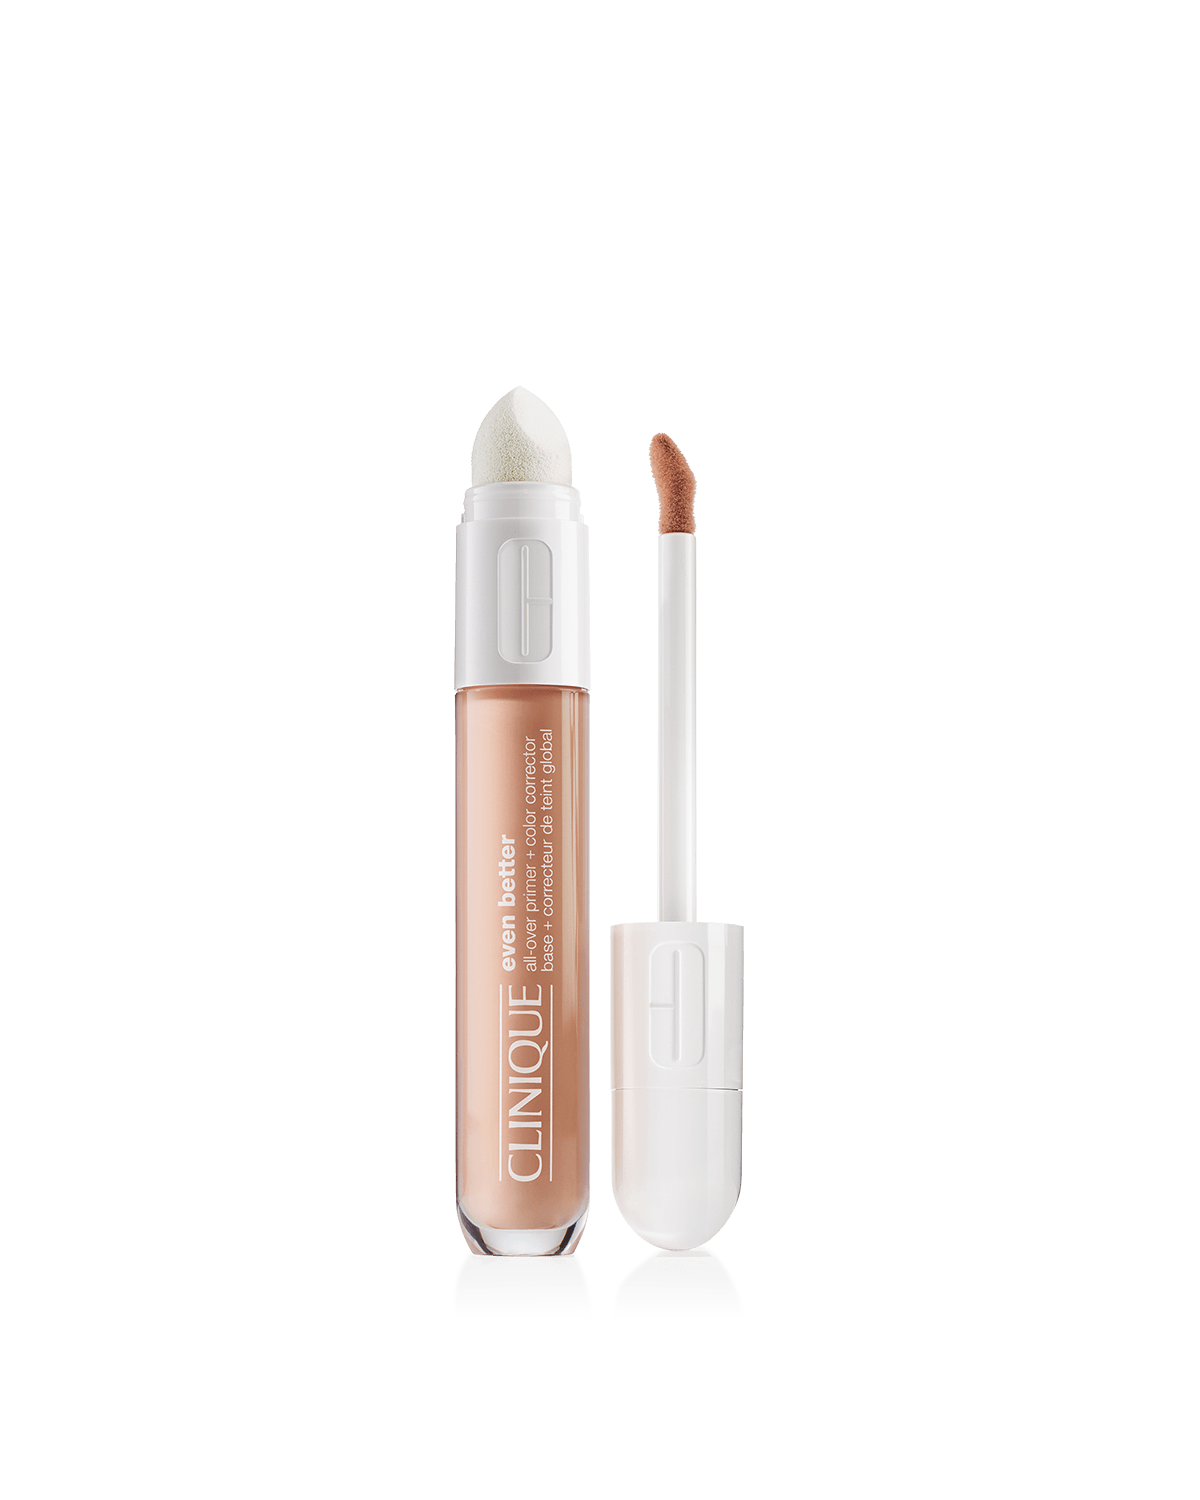 NEW Even Better™ All-Over Primer and Color Corrector